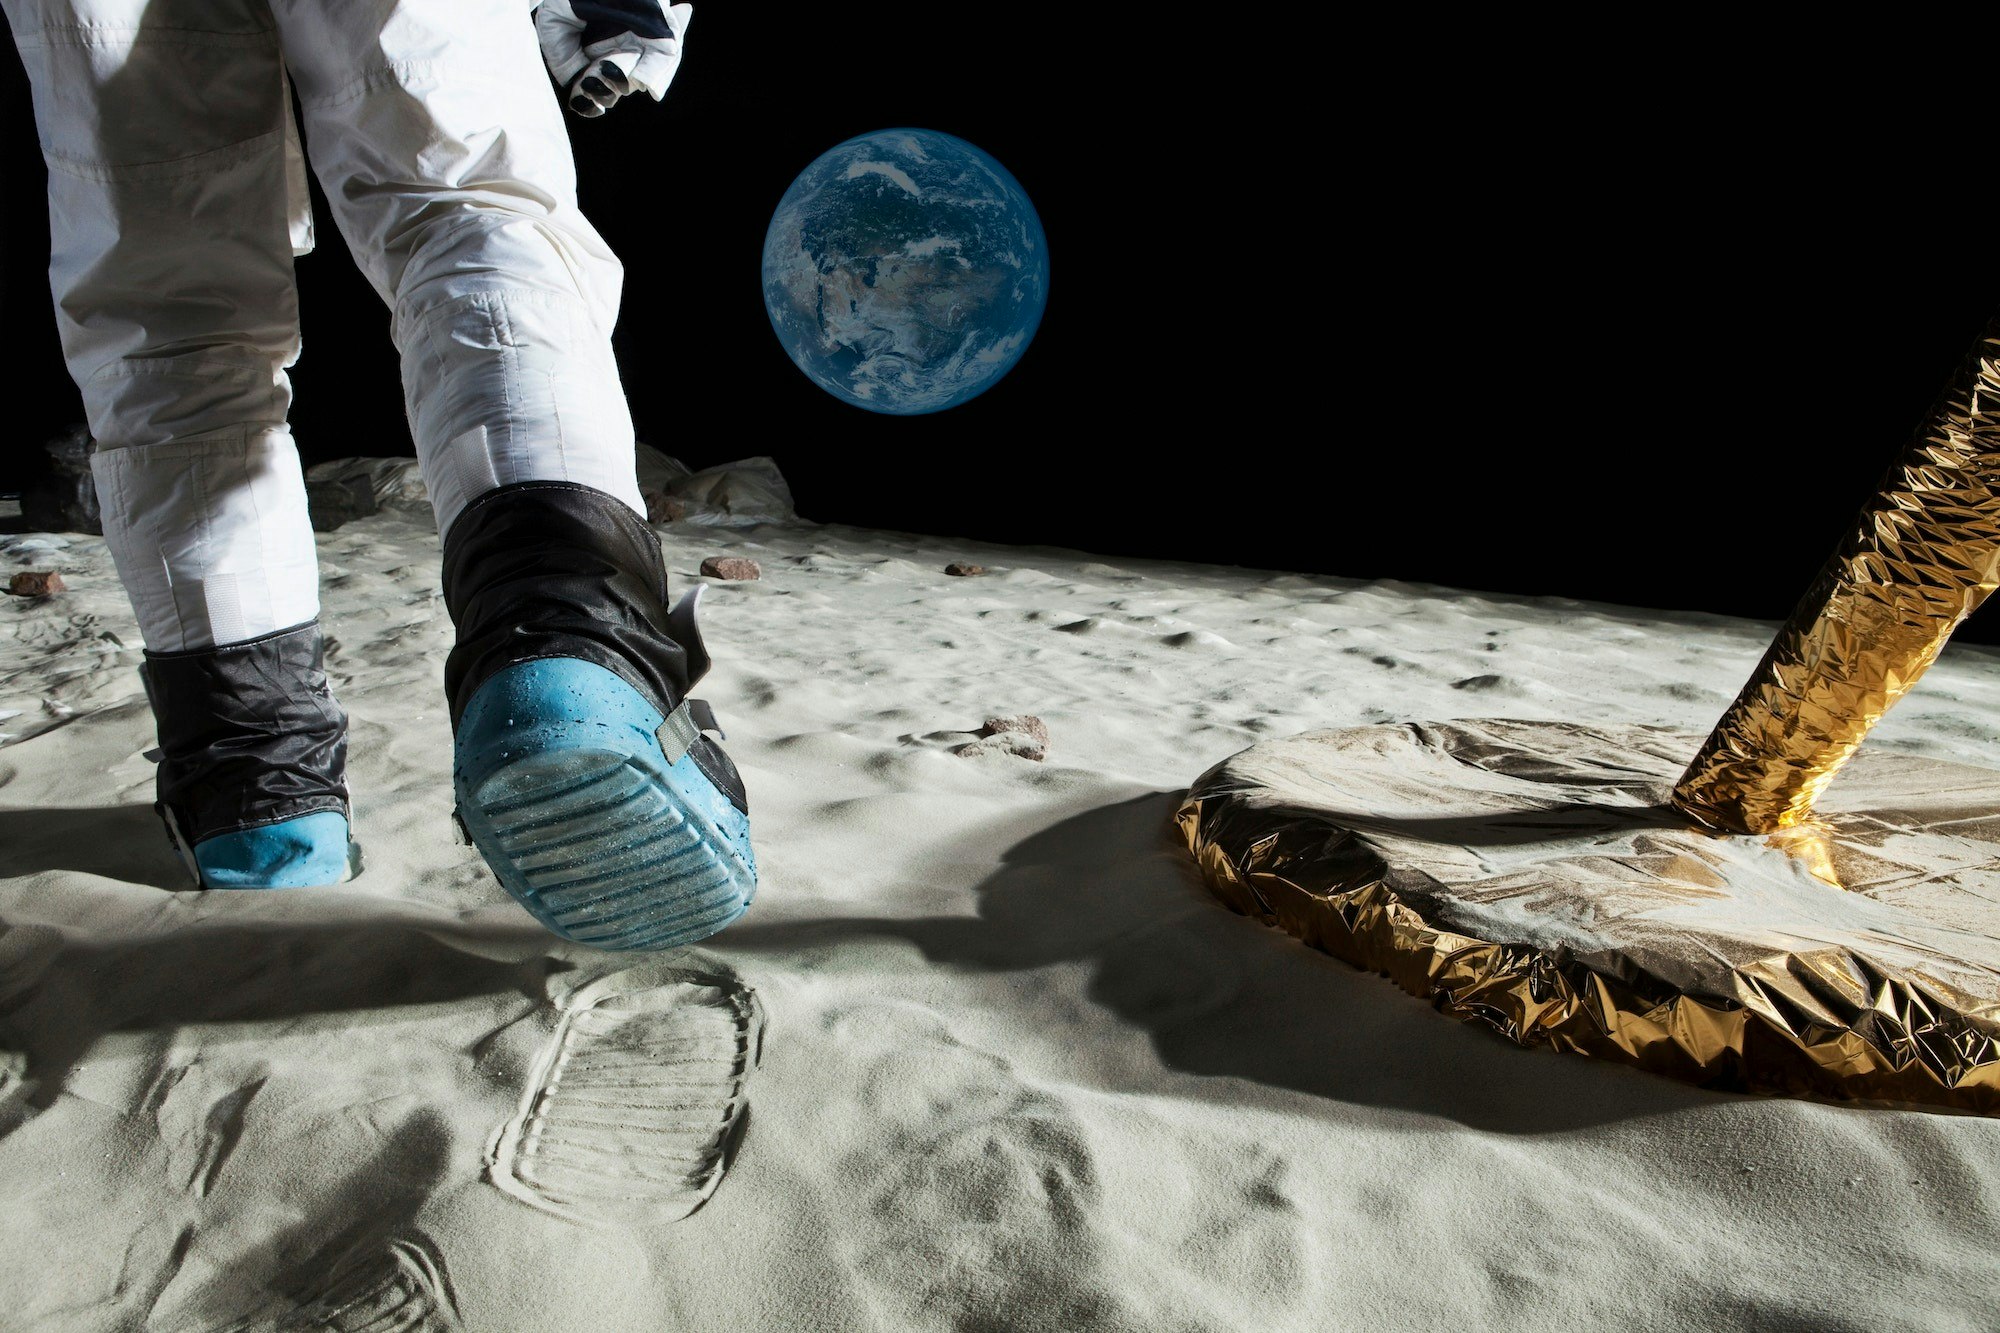 Neil Armstrong walking on the moon